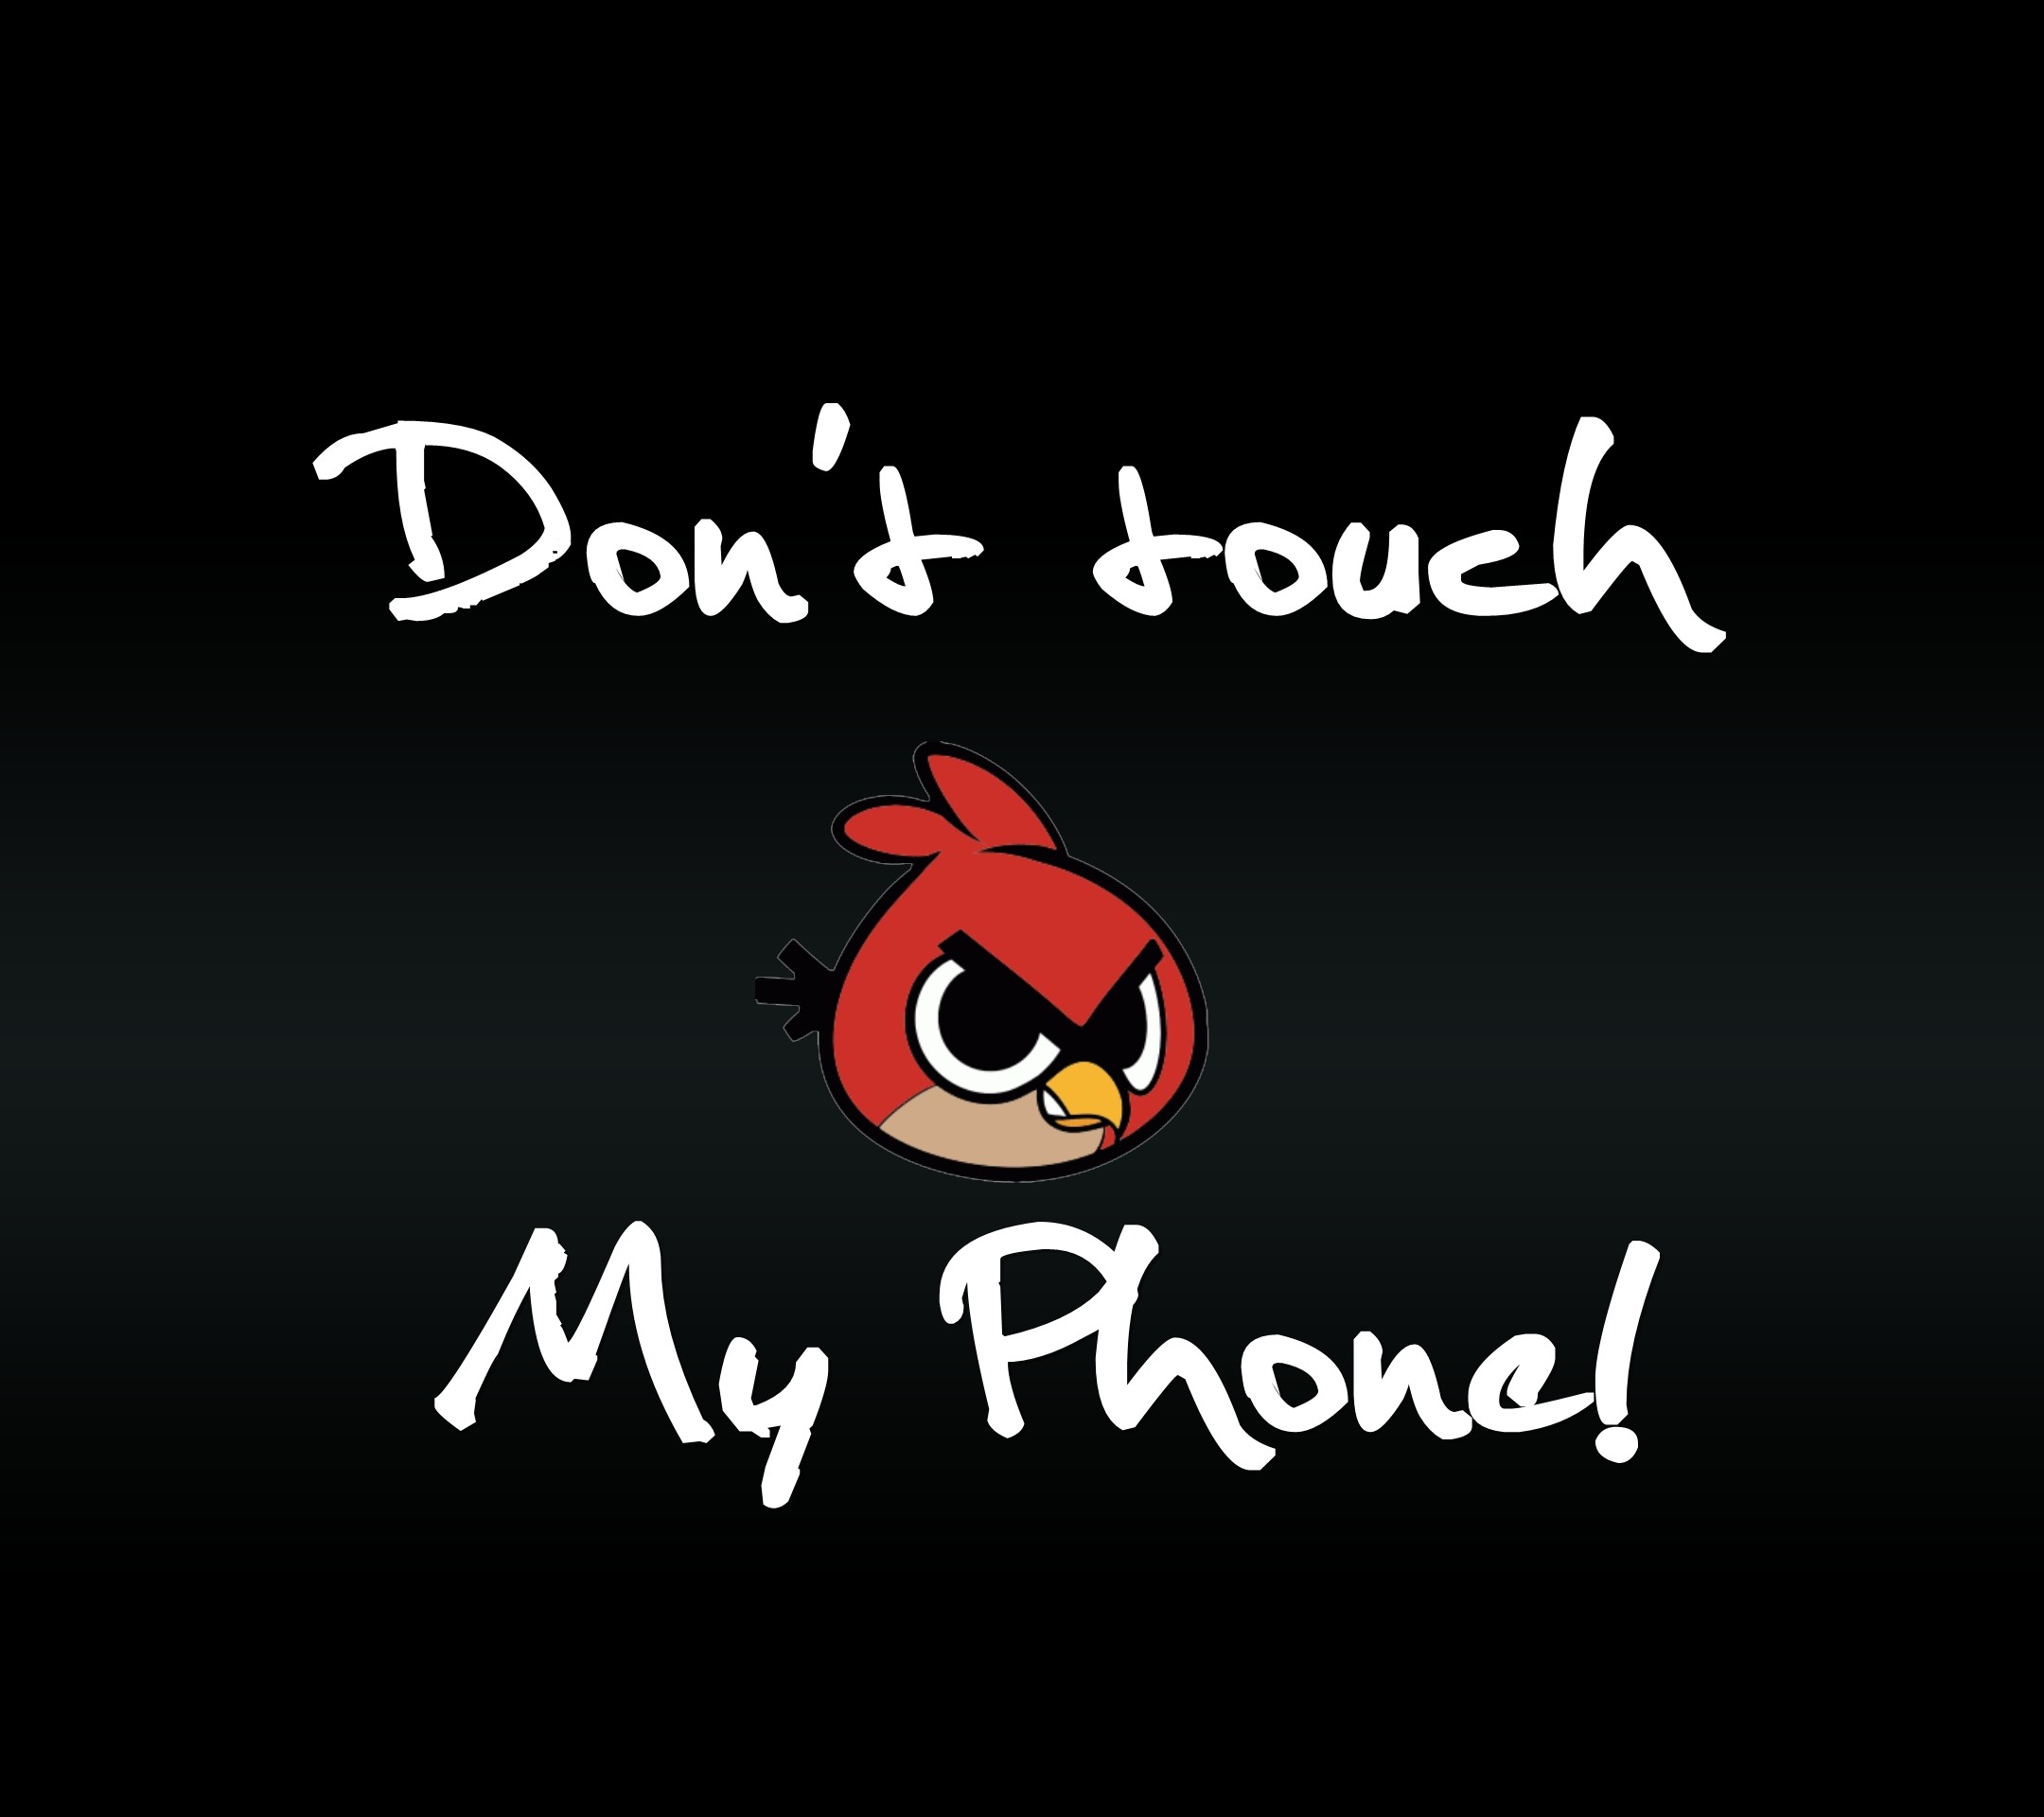 Dont Touch My Laptop Wallpapers